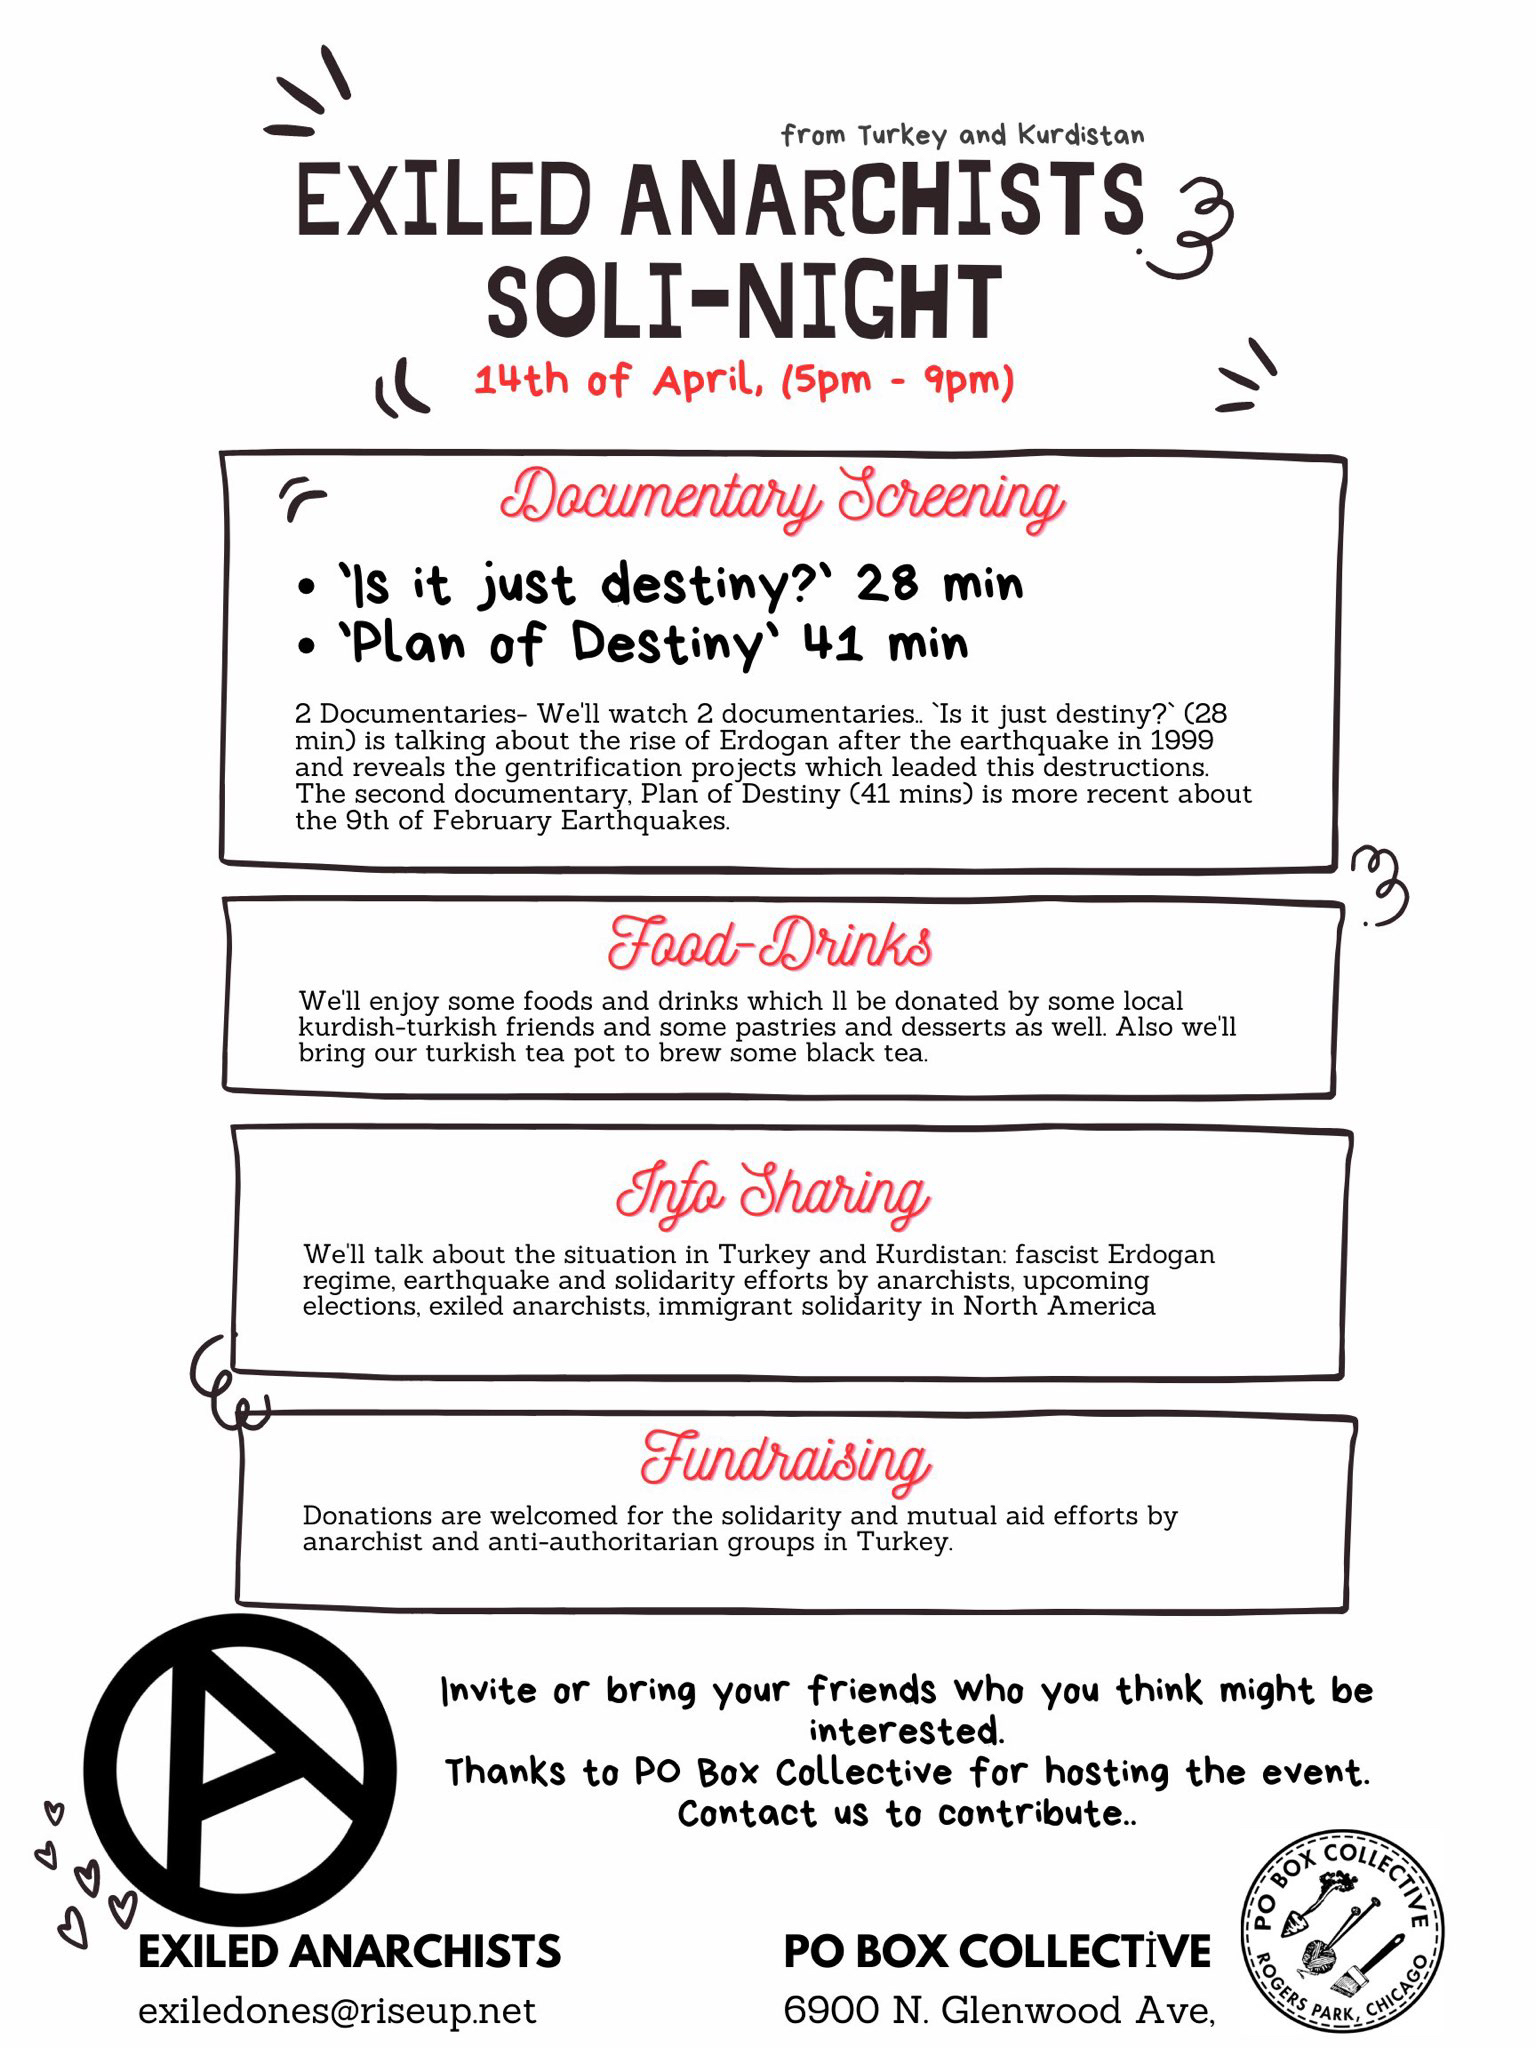 Soli-night Exiled Anarchists flyer